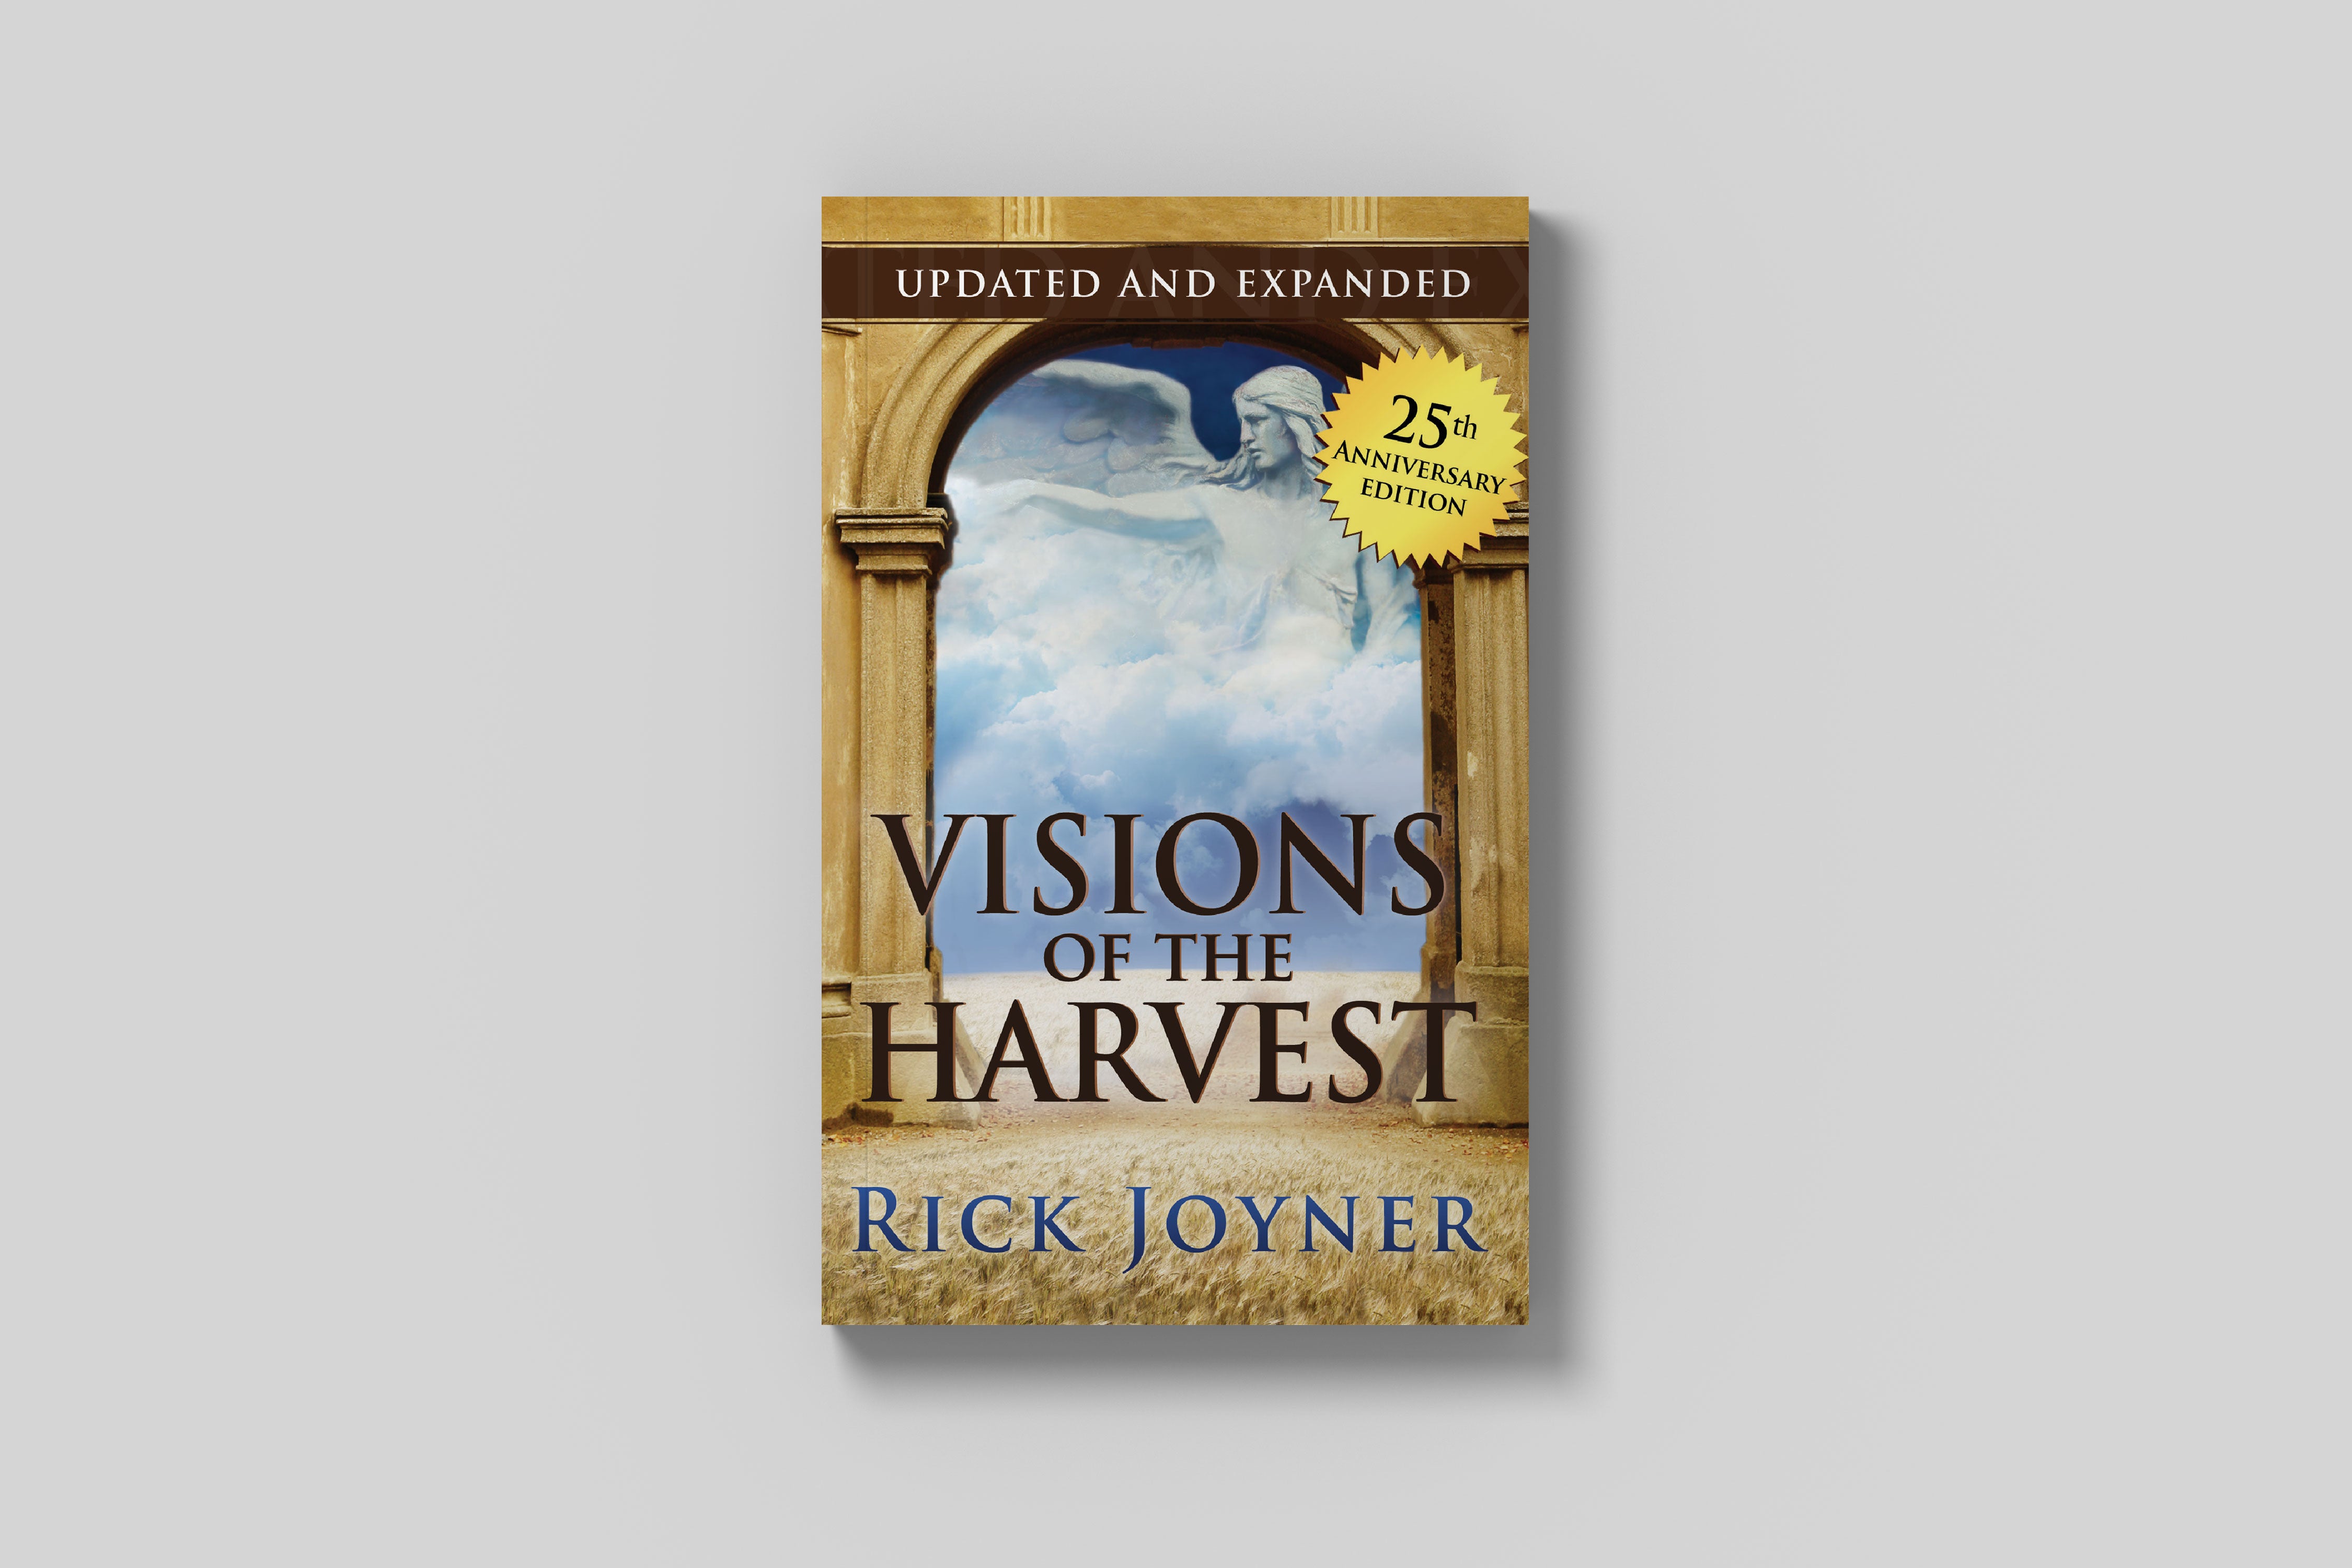 Visions of the Harvest: 25th Anniversary Edition